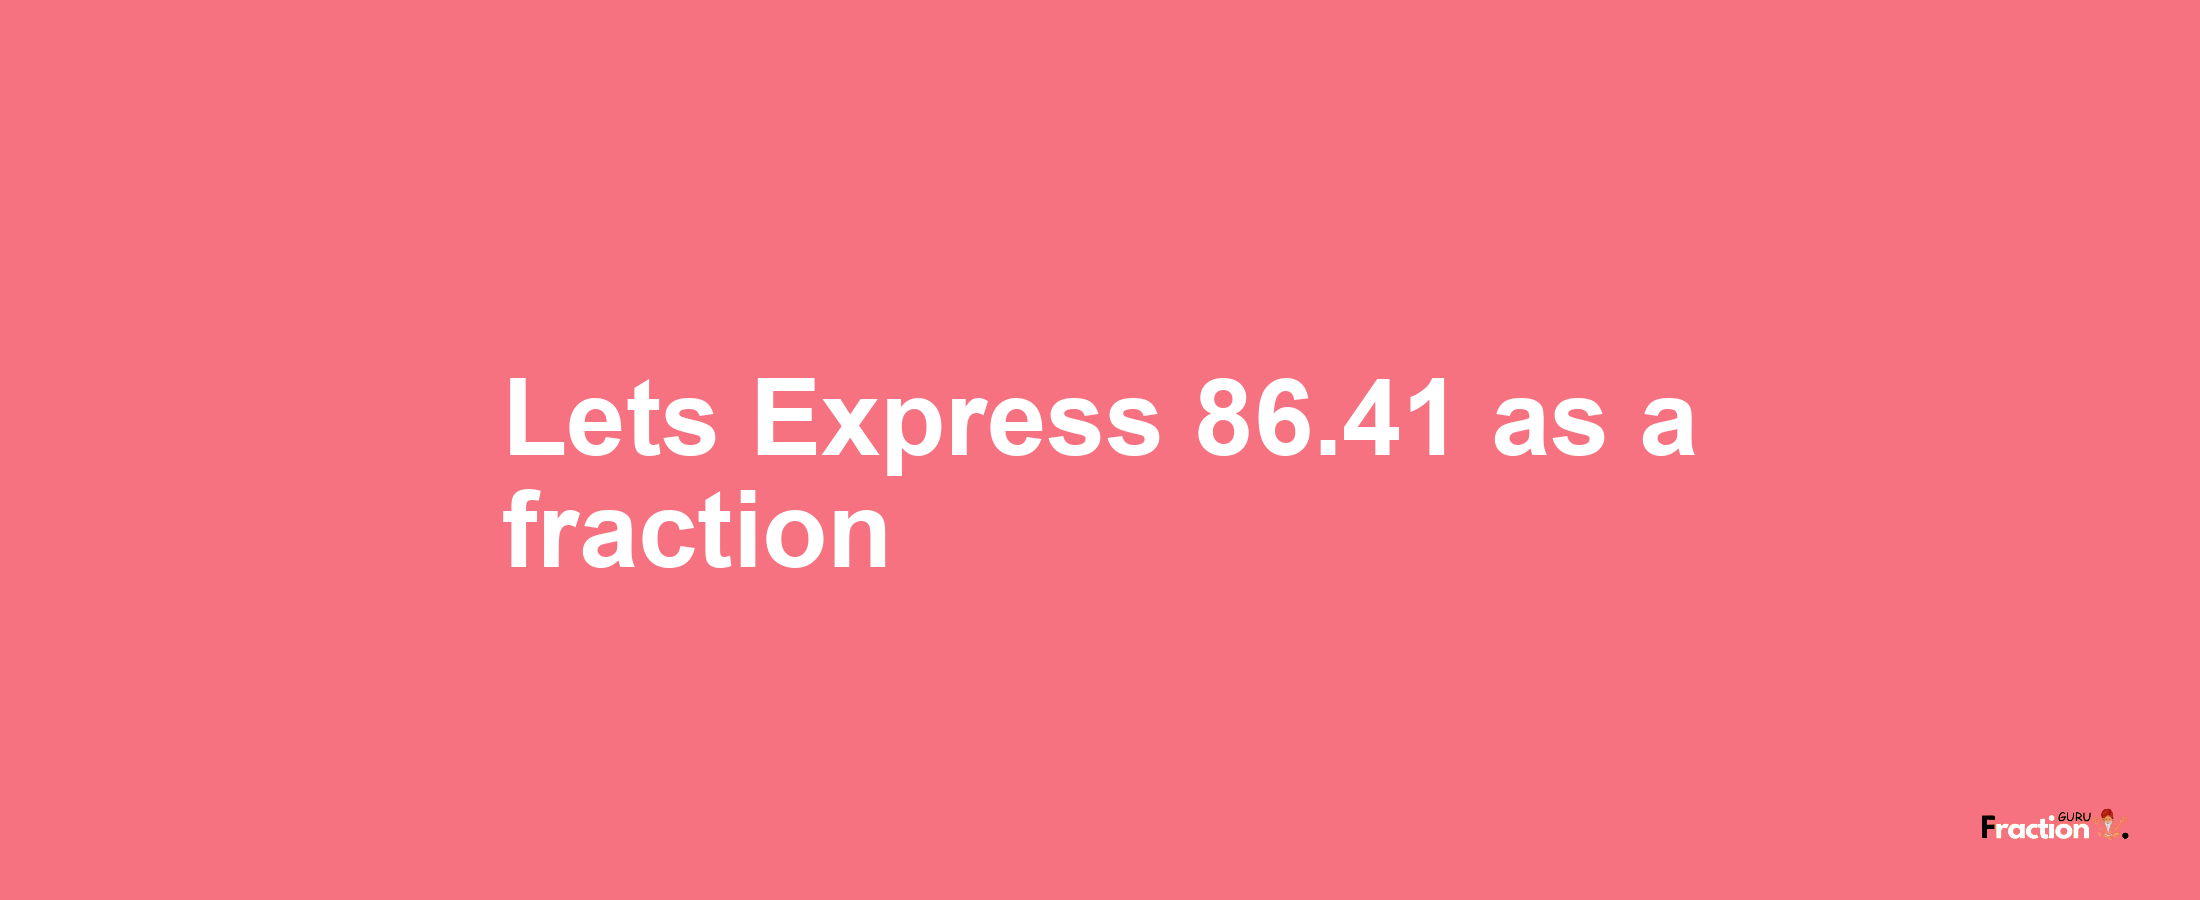 Lets Express 86.41 as afraction